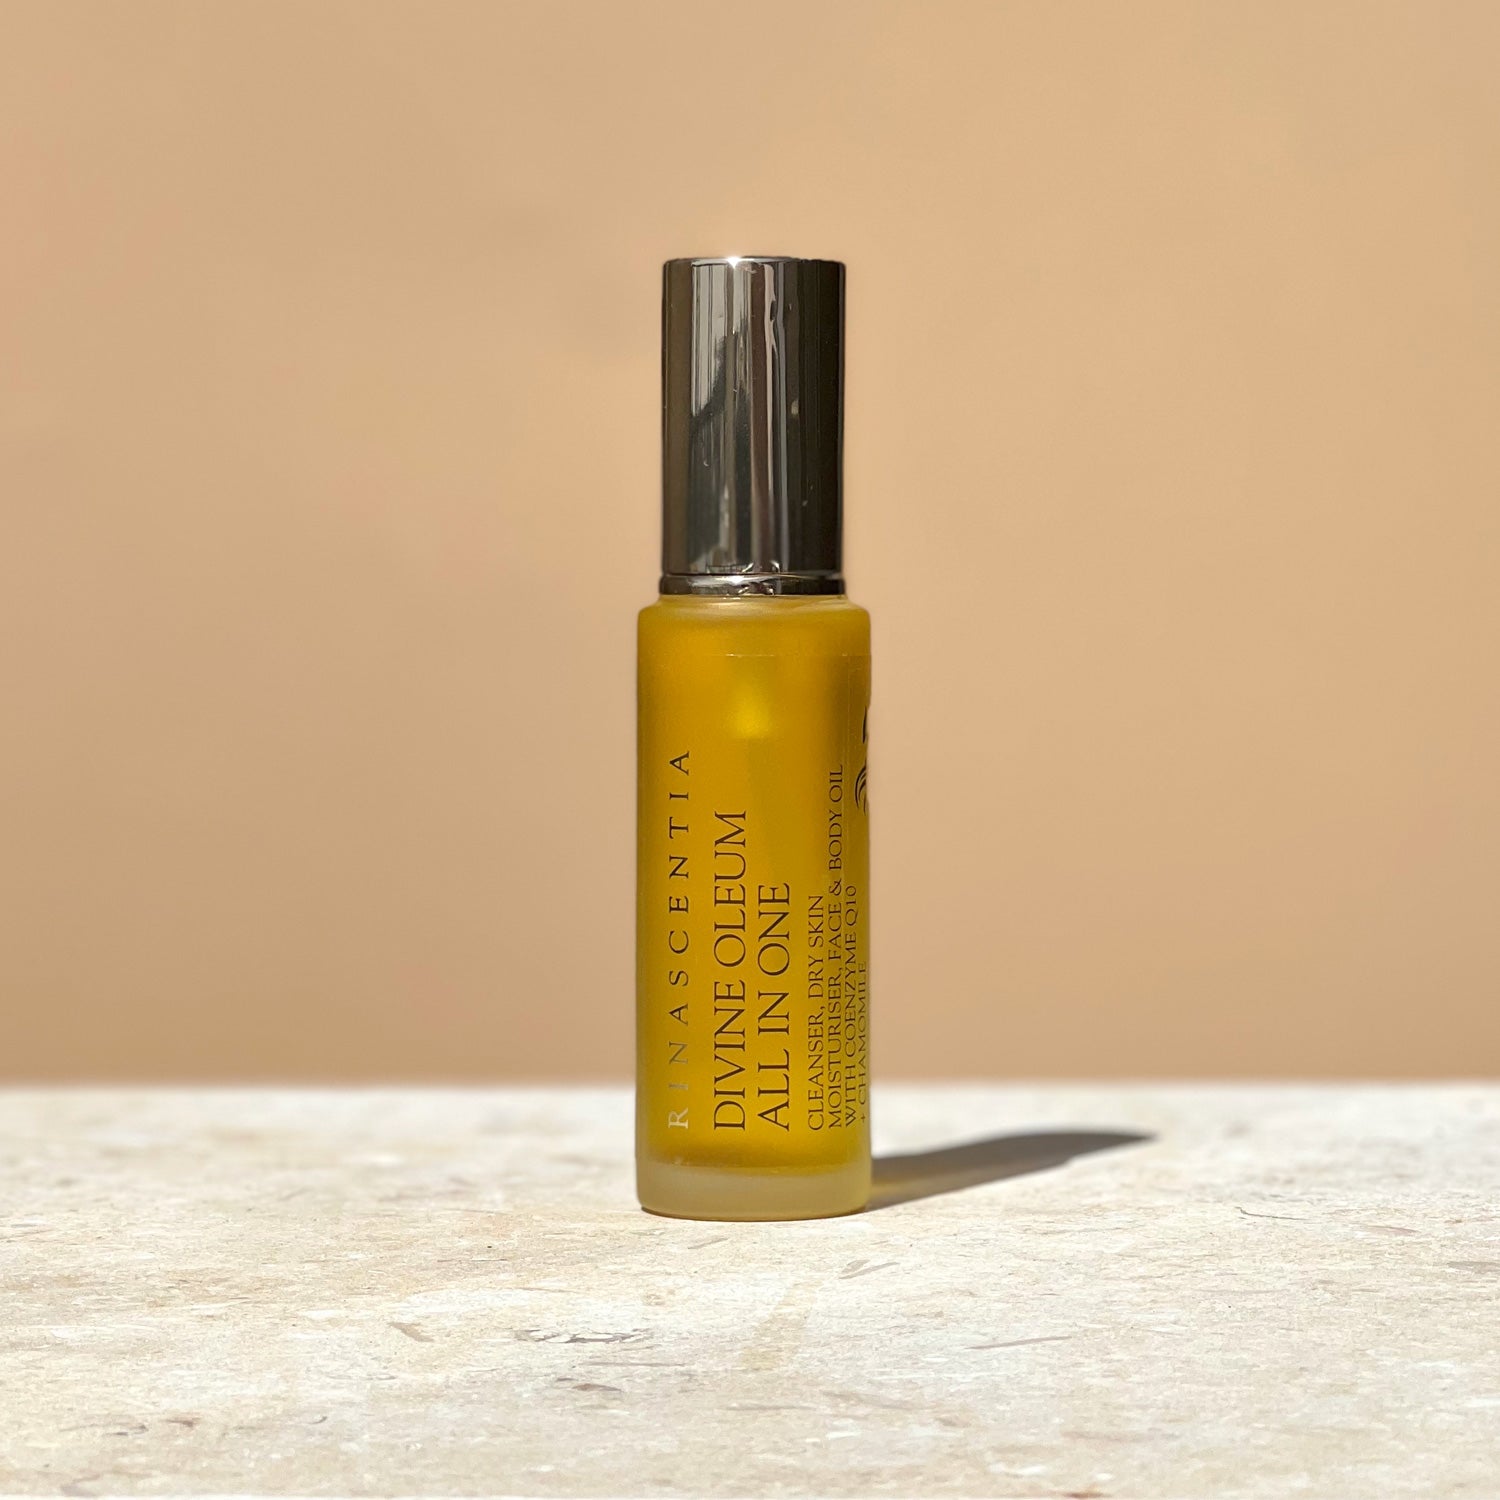 All in one cleansing oil serum in a bottle with gold lid on limestone base